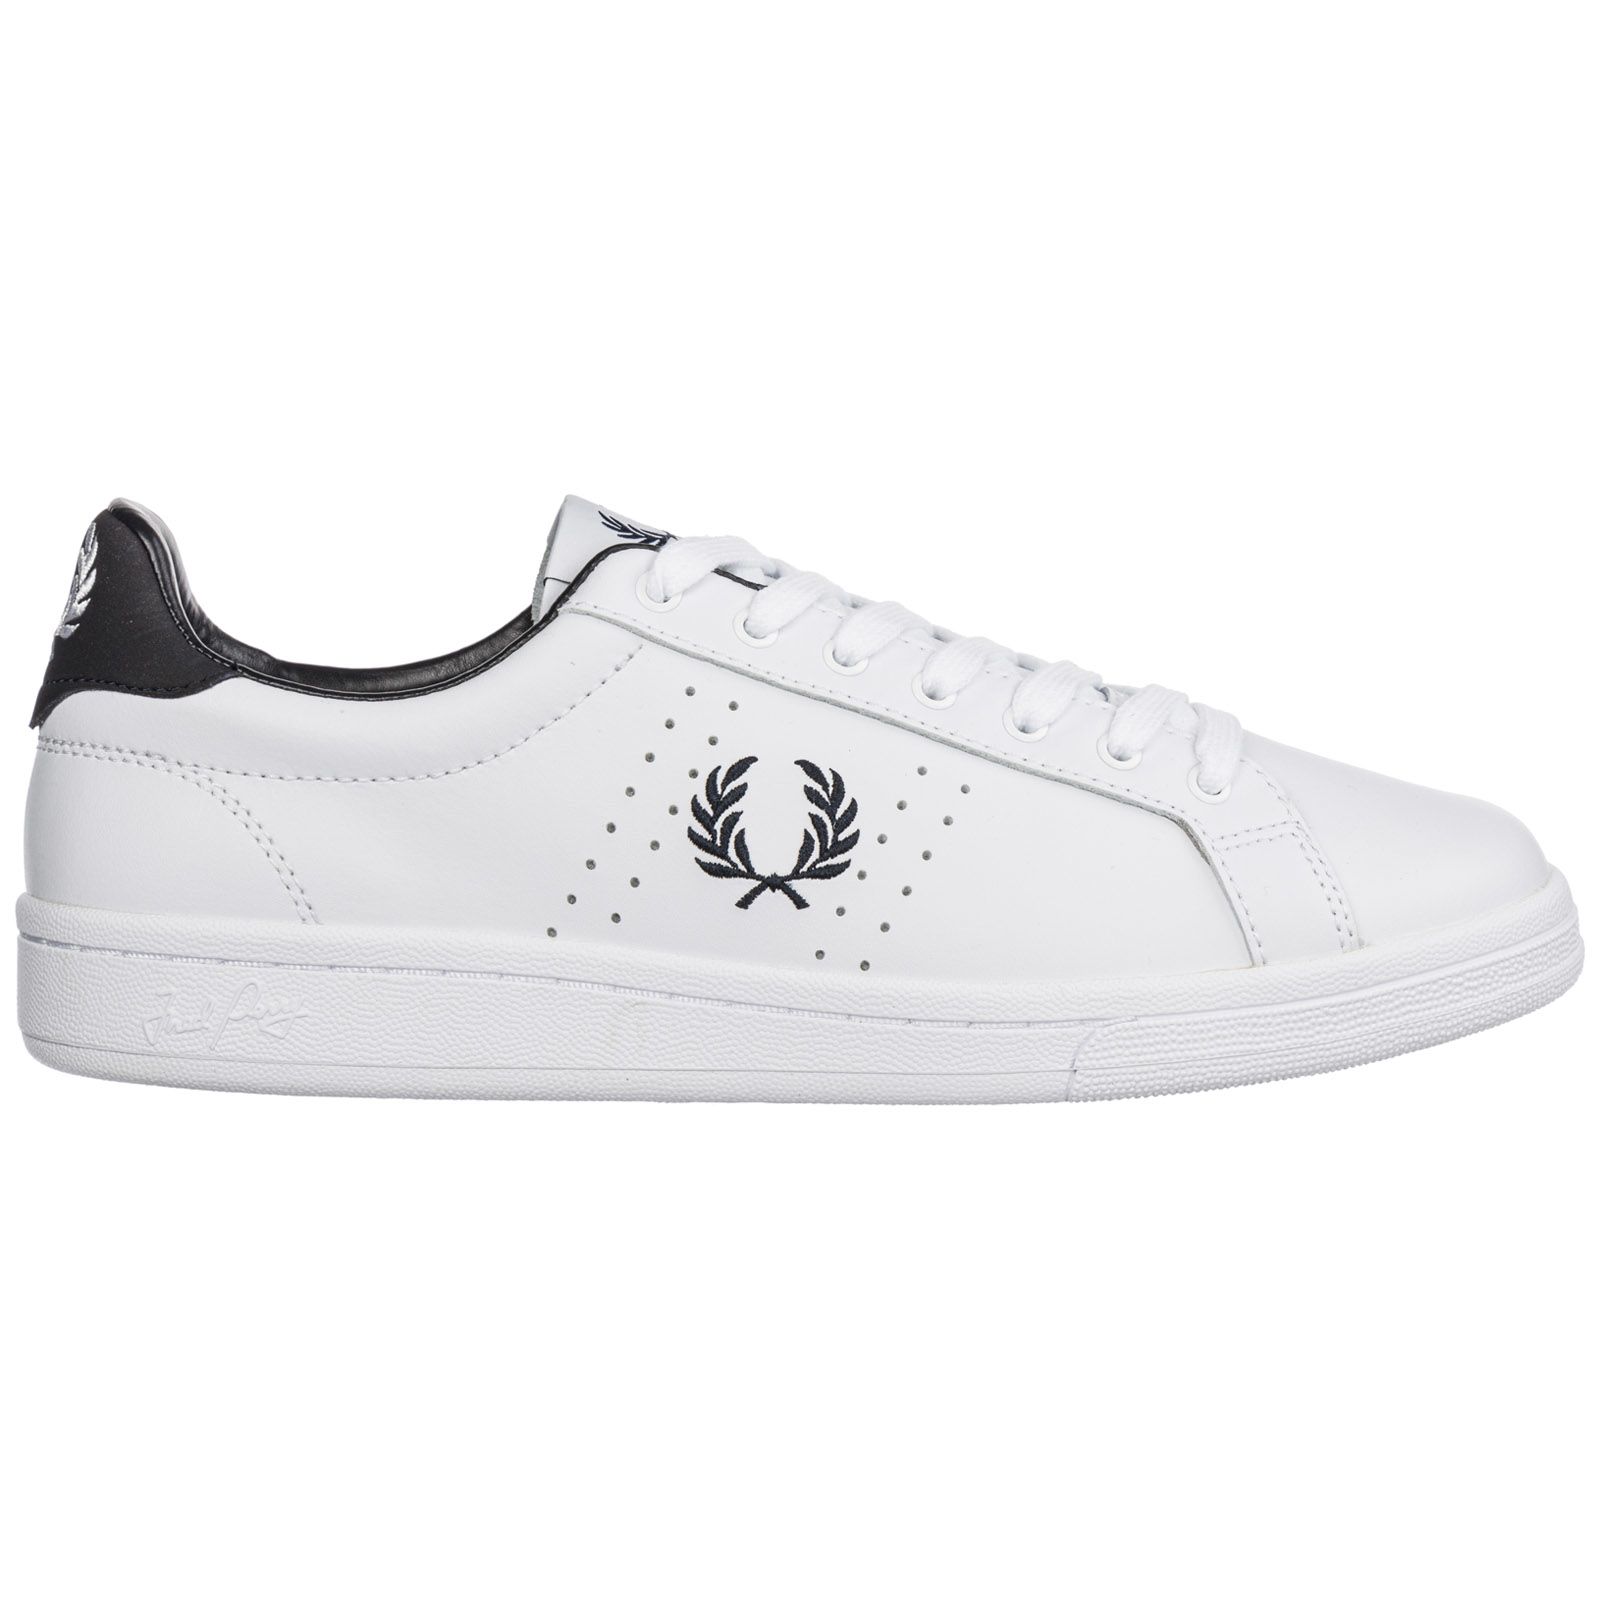 fred perry shoes size guide